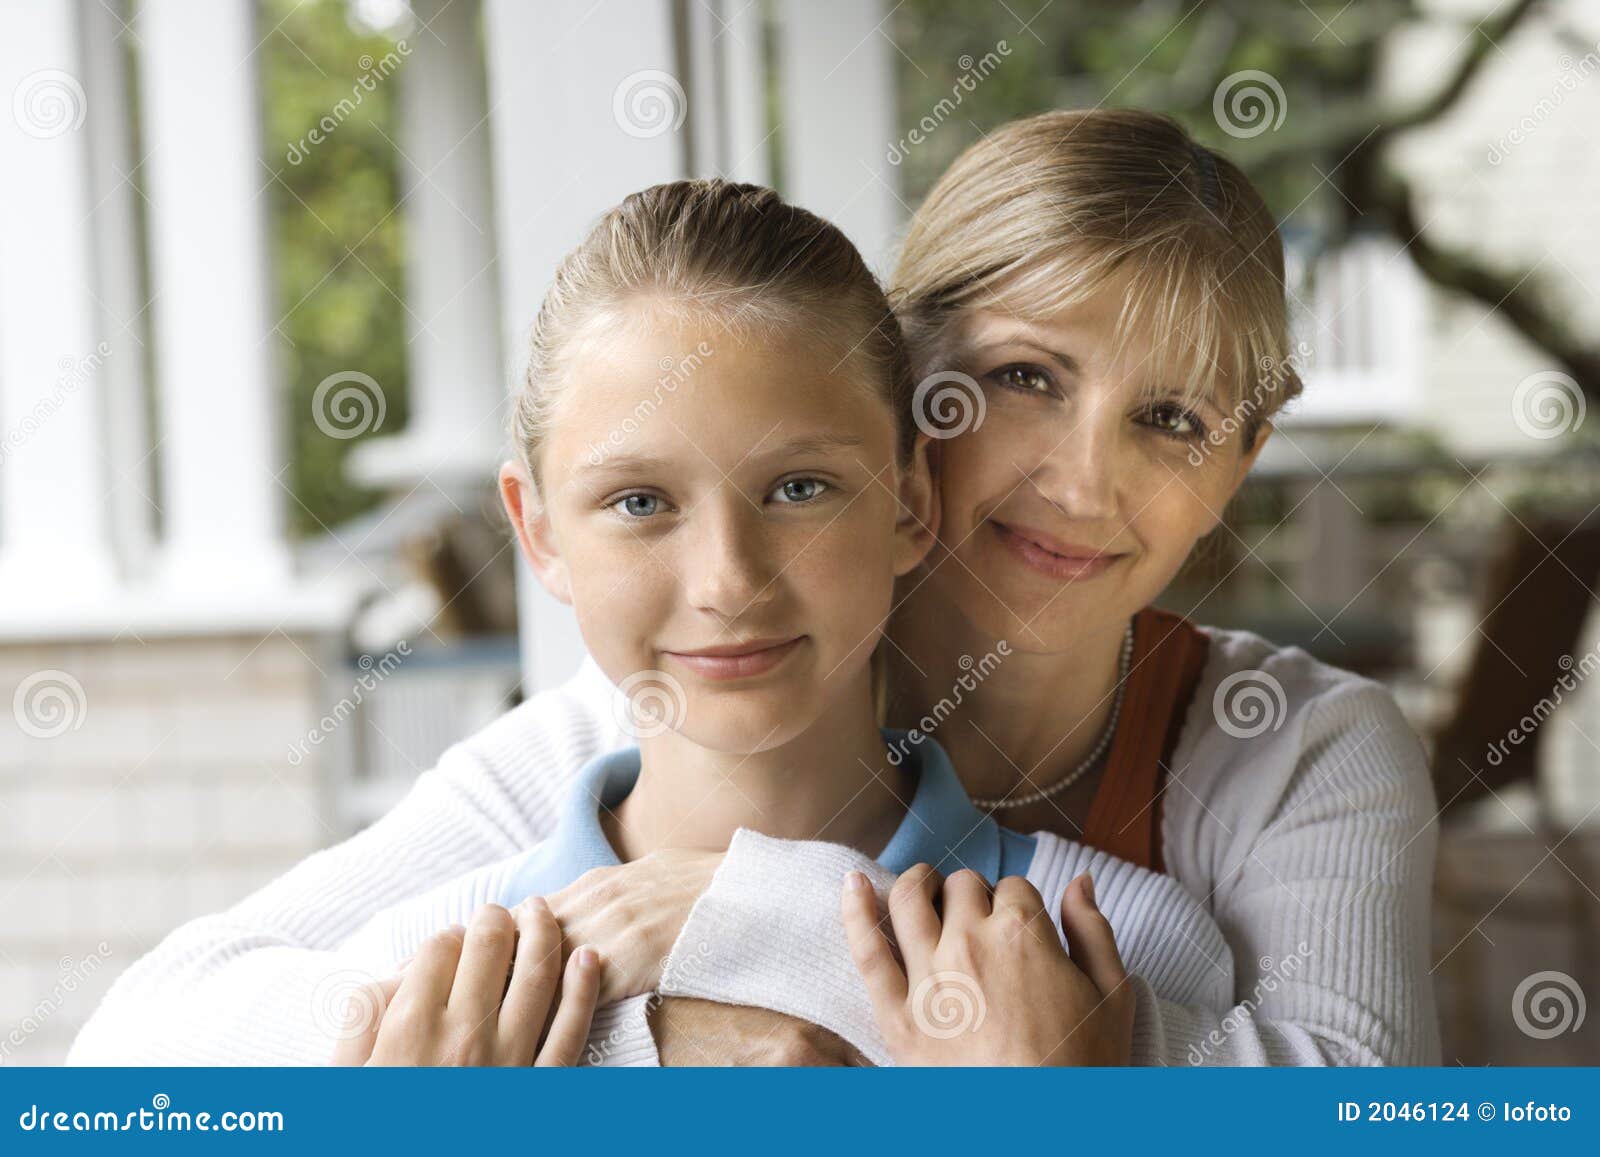 Mom and daughter hugging. stock photo. Image of holding - 2046124